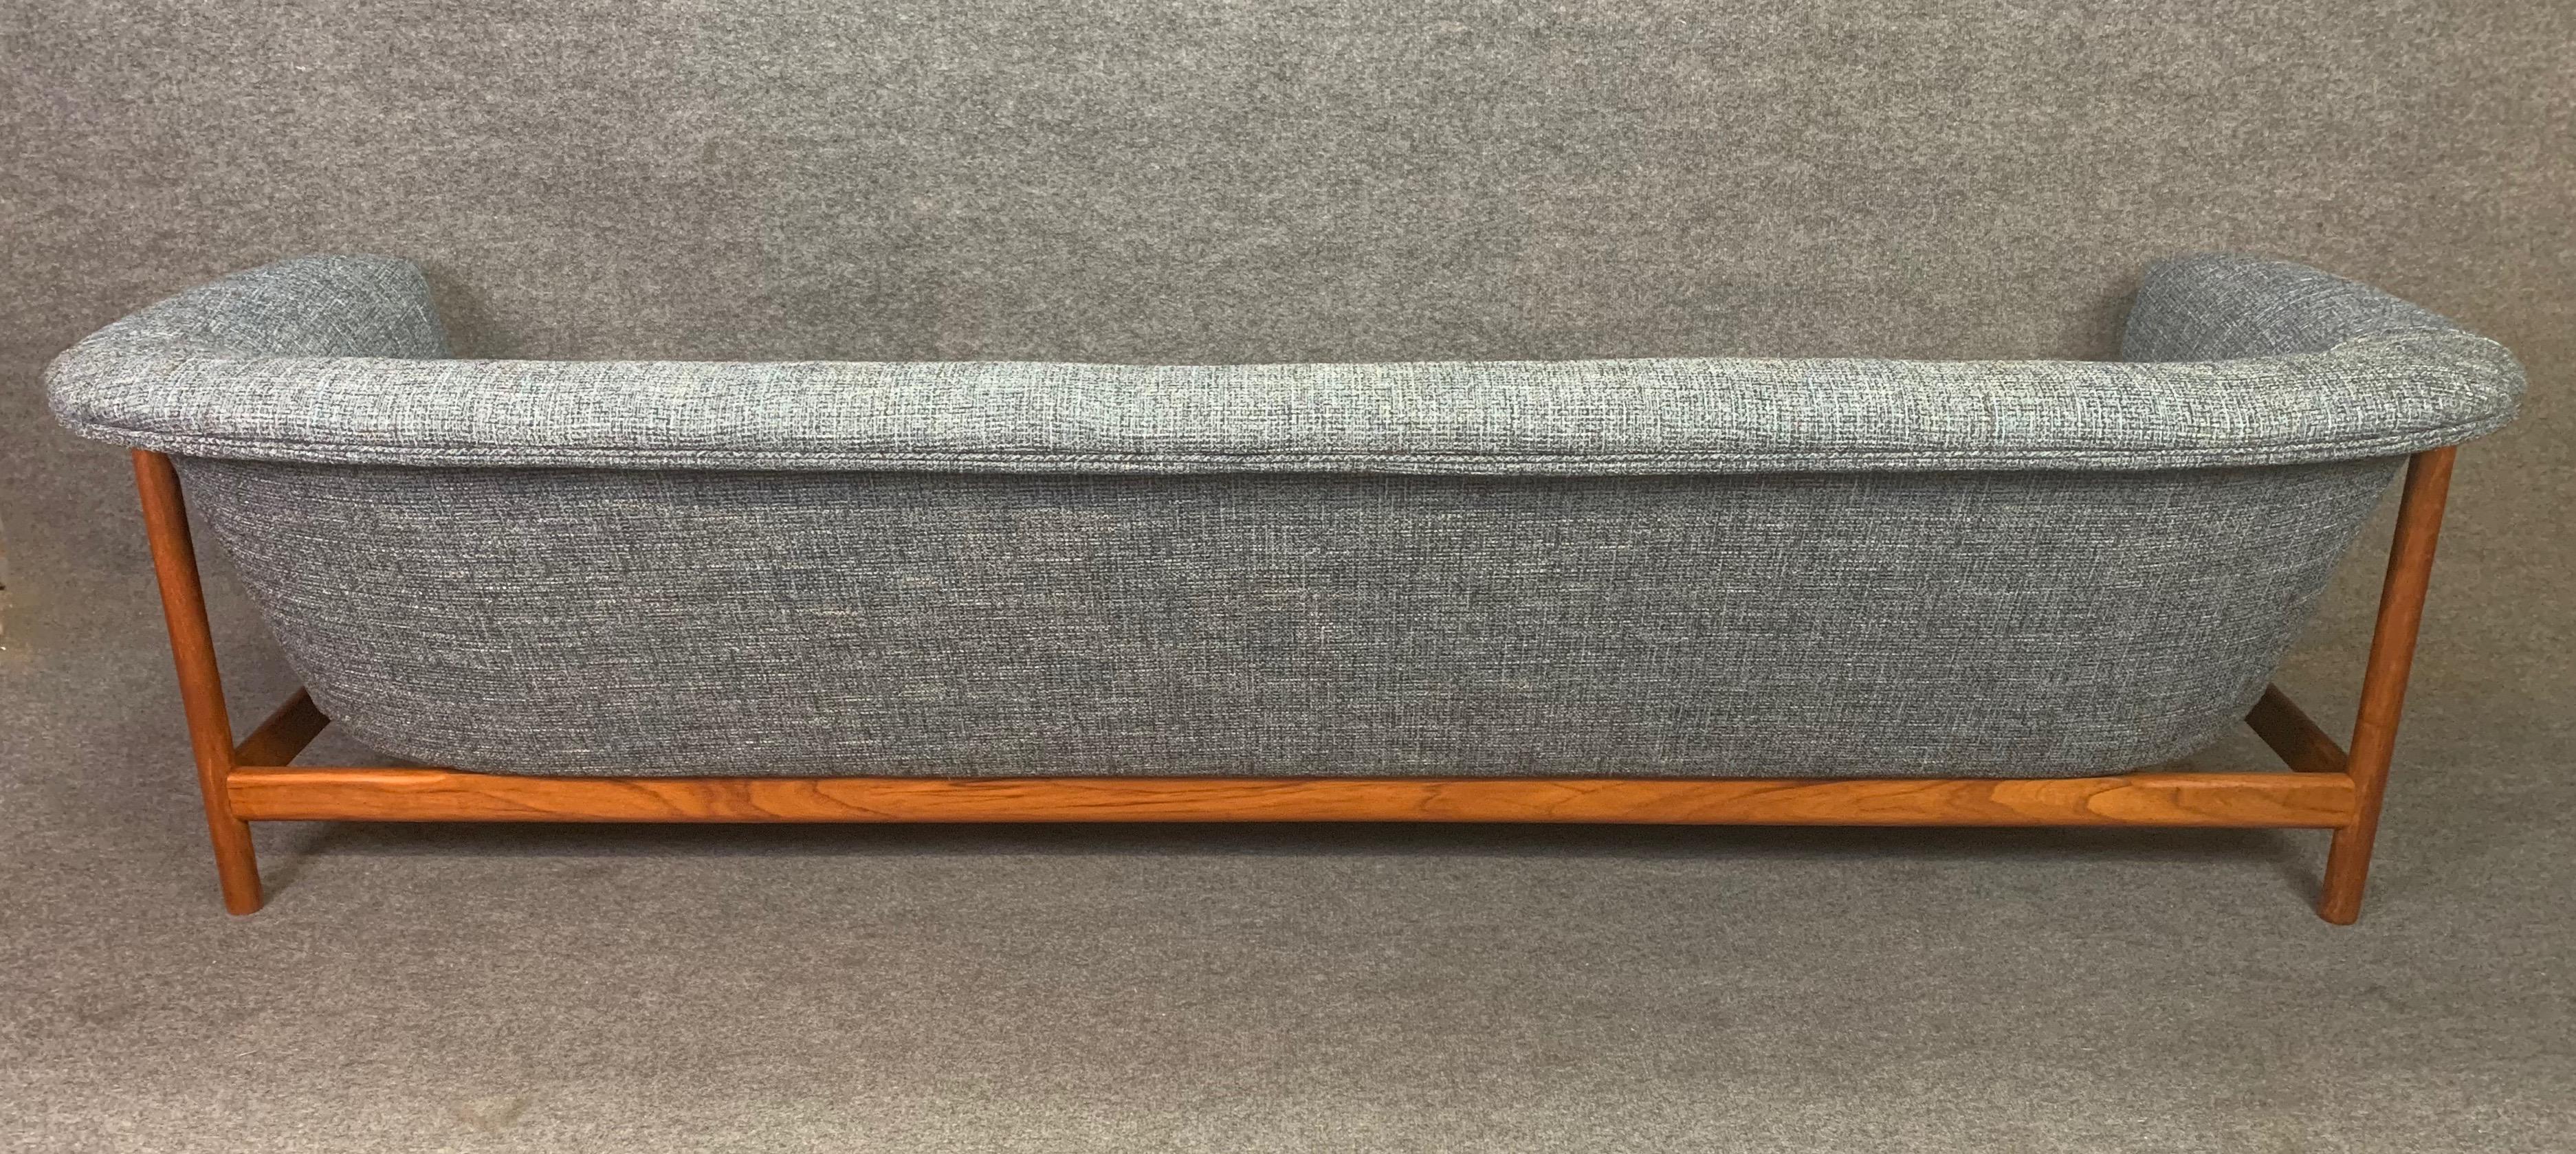 Here is a rare and beautiful Scandinavian Modern teak sofa manufactured by Westnoga in Norway in the 1960s.
This comfortable couch features a refinished solid teak frame and received a brand new foam and period correct textured upholstery in